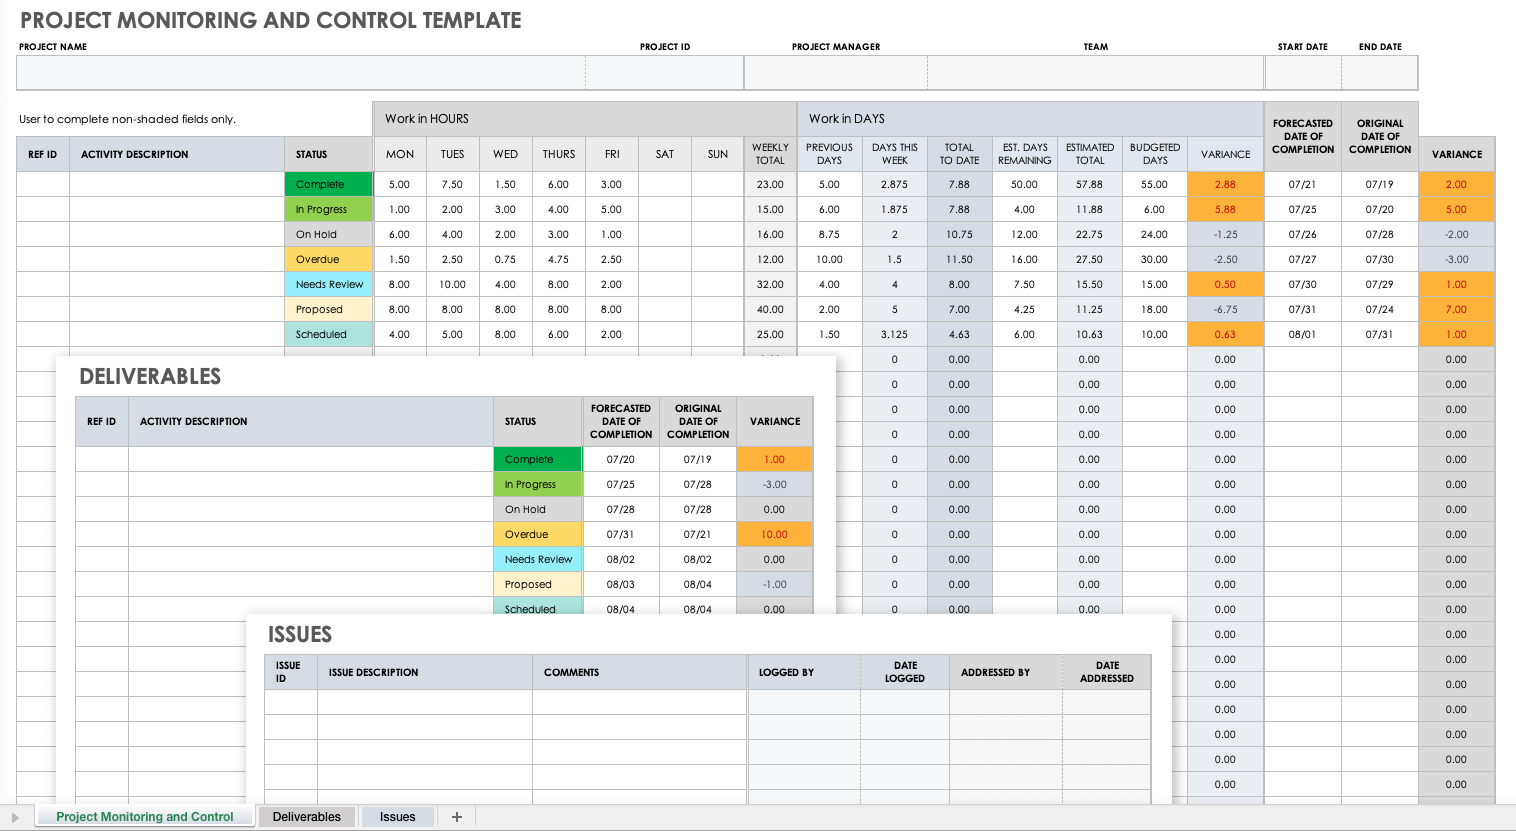 Project Monitoring and Control Templates